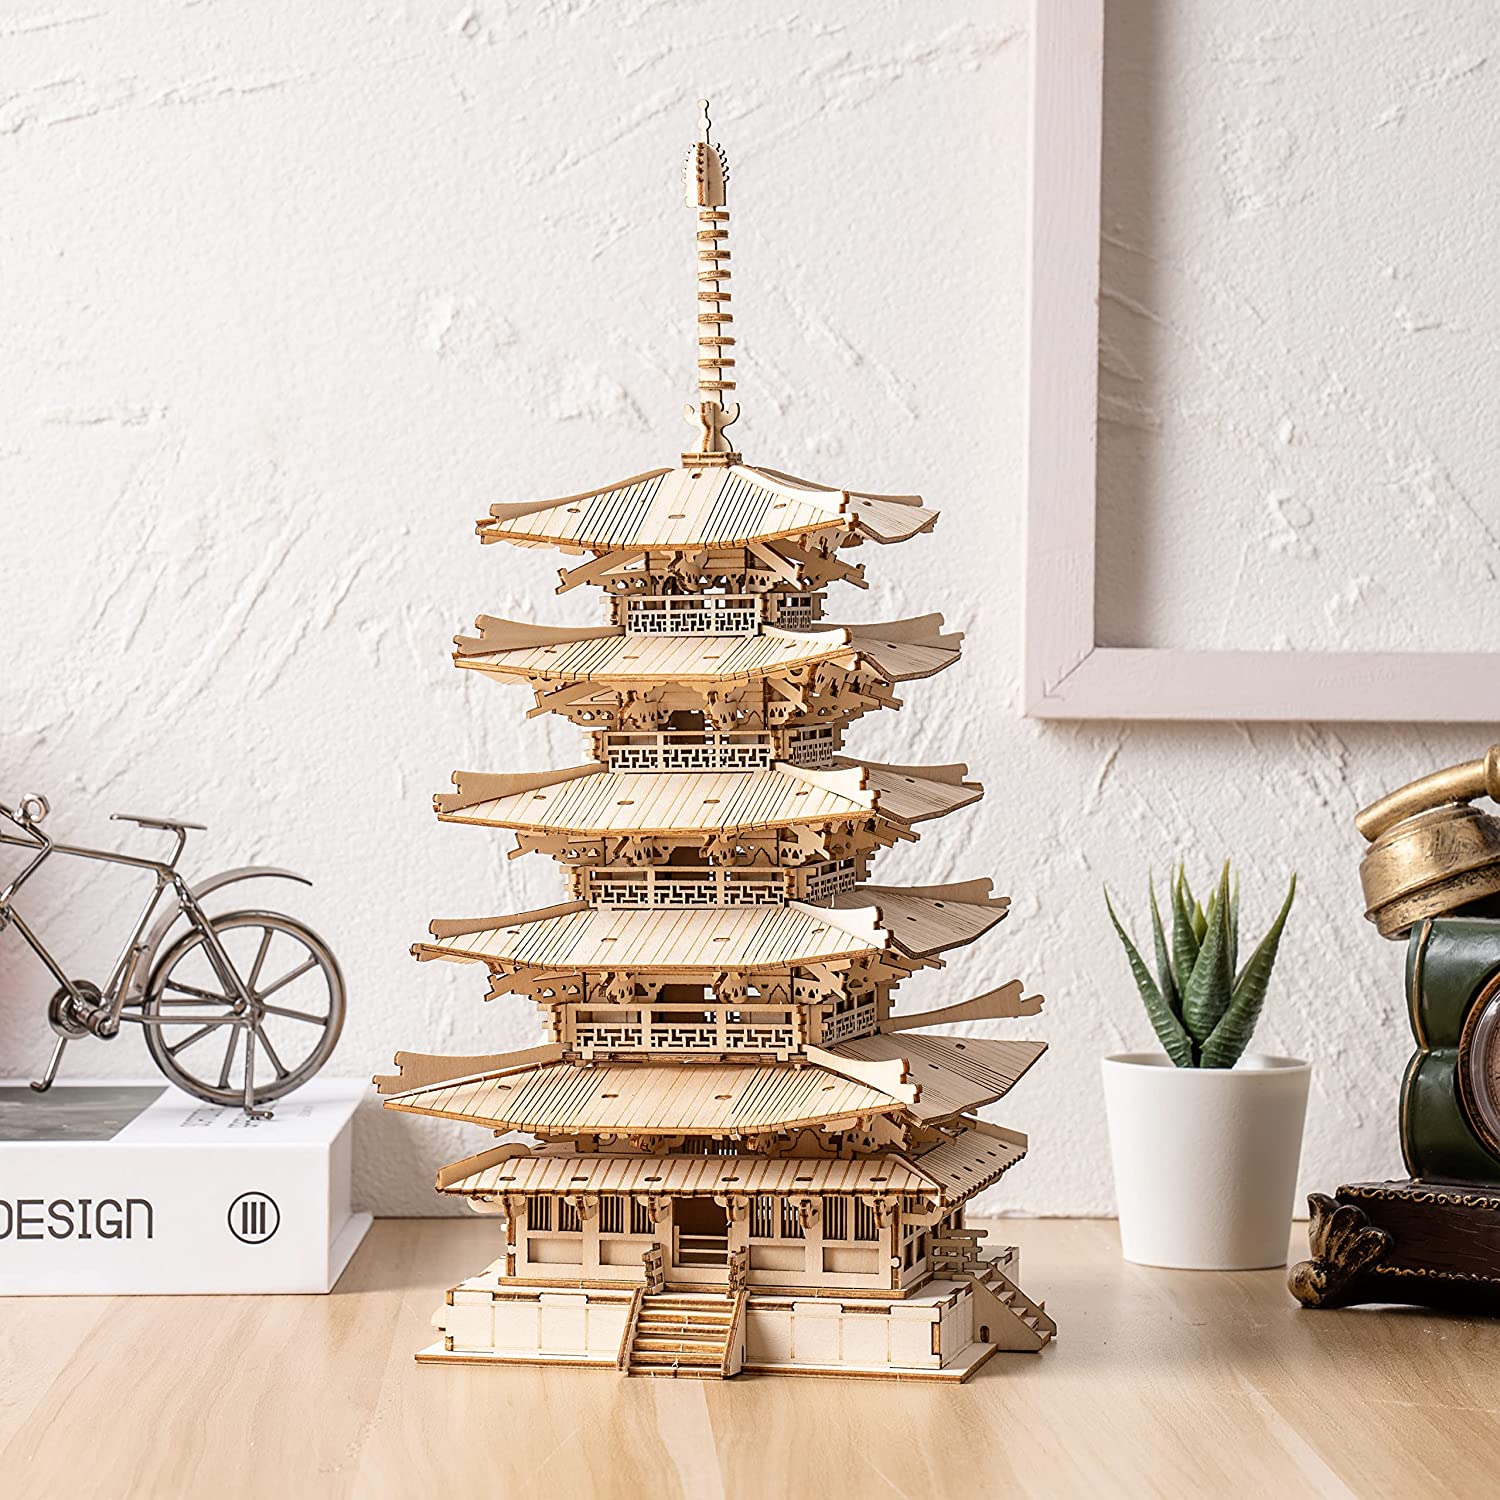 Robotime Five-Storied Pagoda 3D Puzzle: Build a beautiful pagoda and learn about architecture!